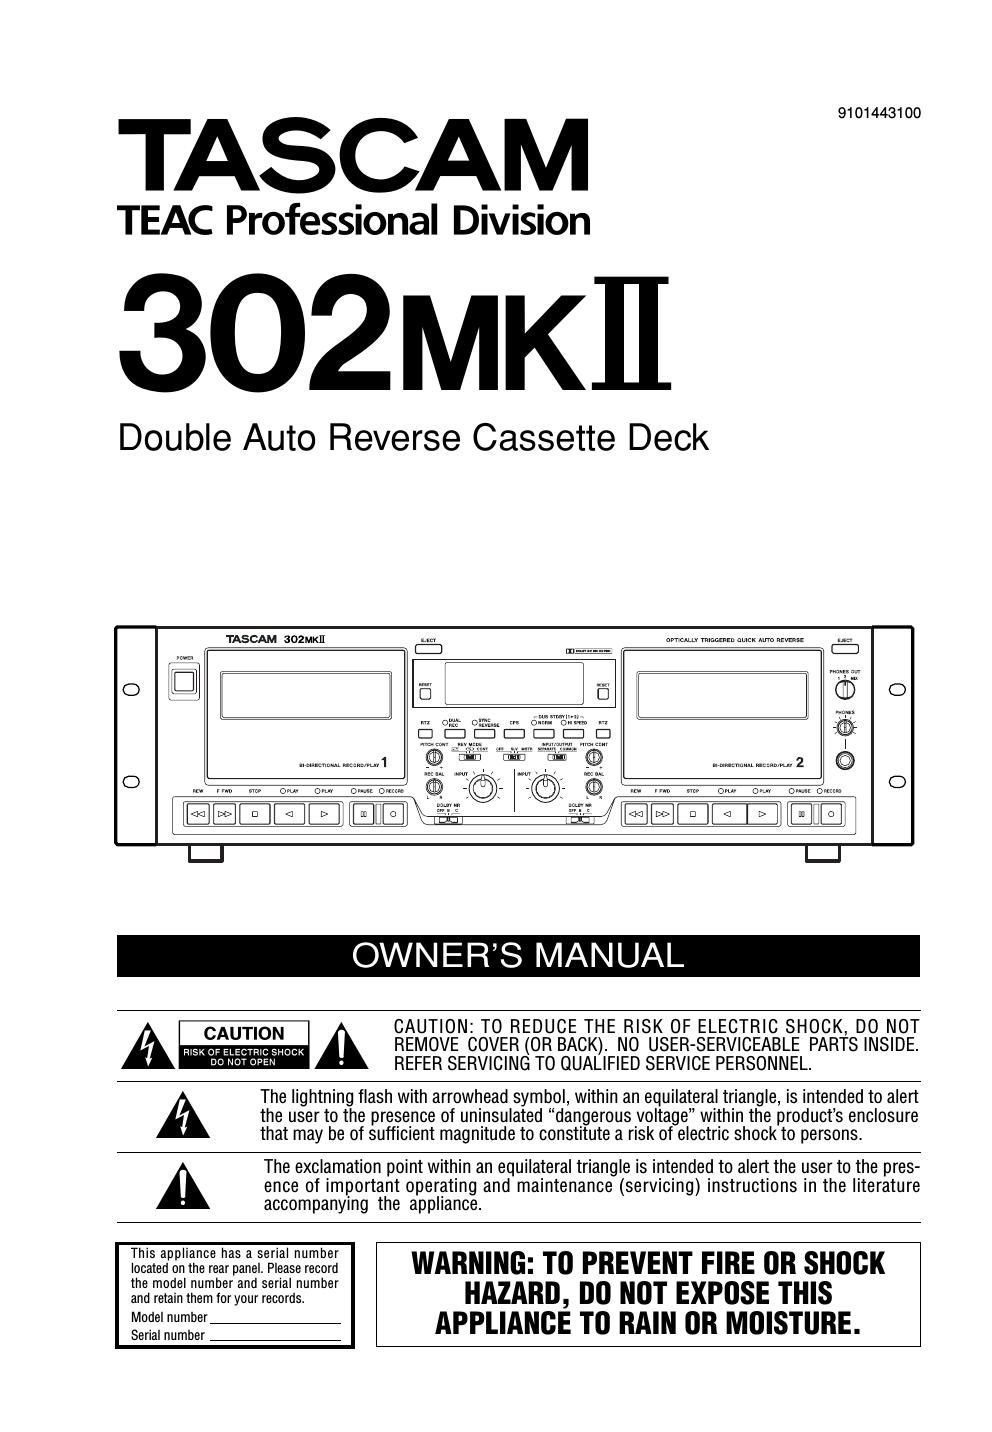 Tascam 302MKII Owners Manual